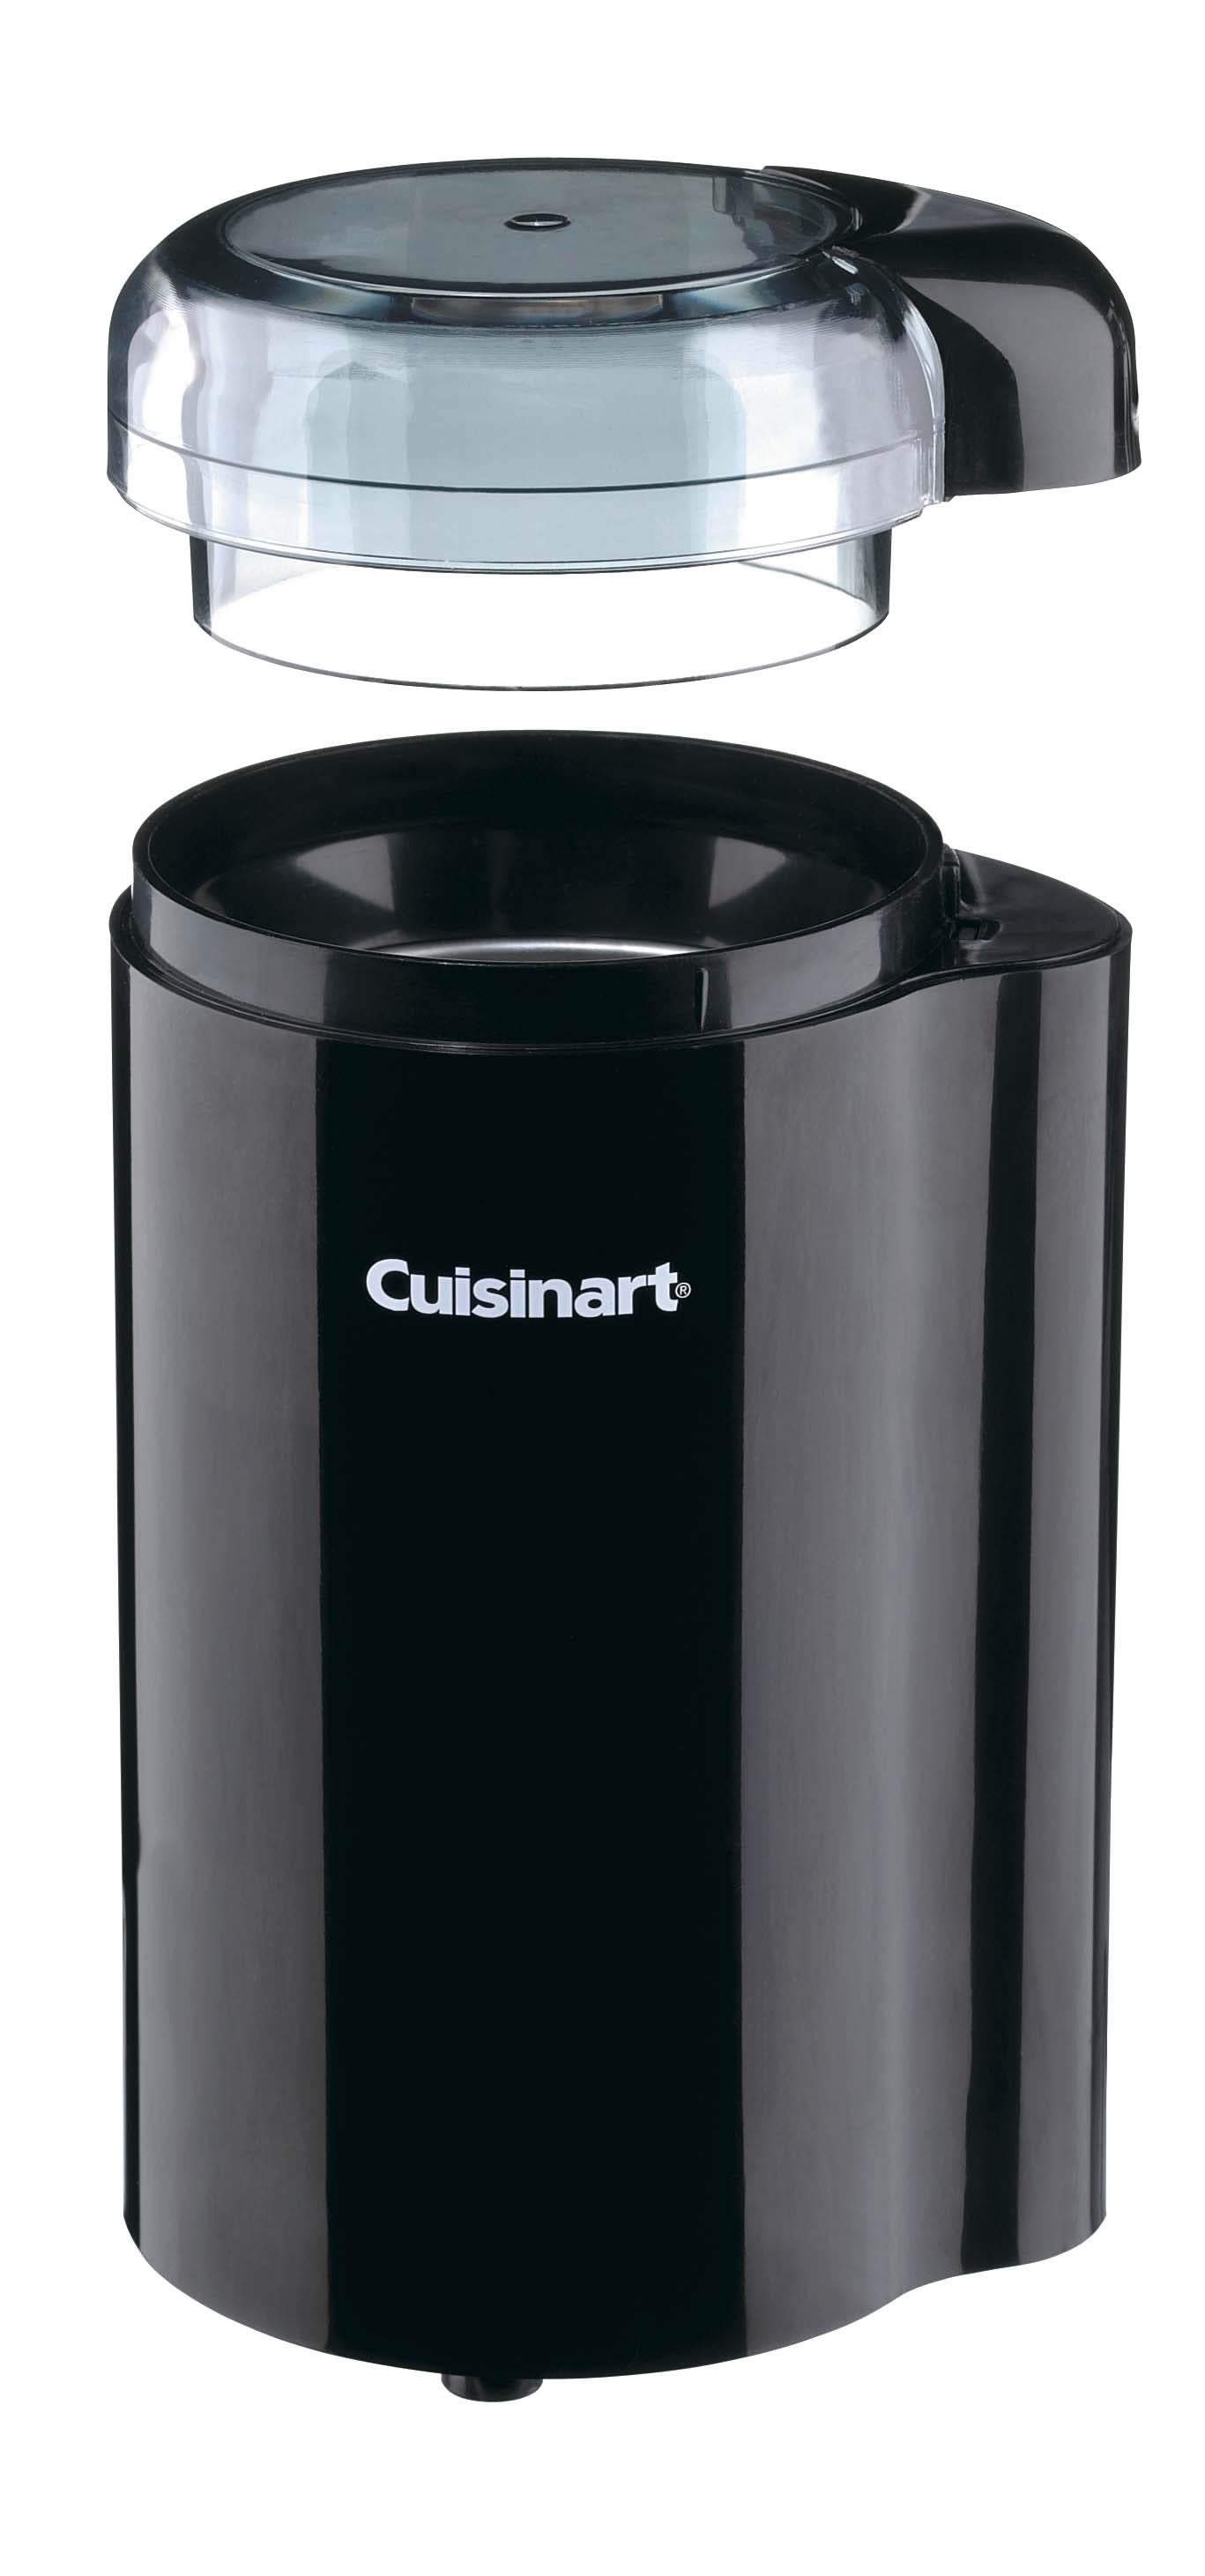 Cuisinart Coffee Grinder - 2.5 oz. bowl - 12 cup capacity